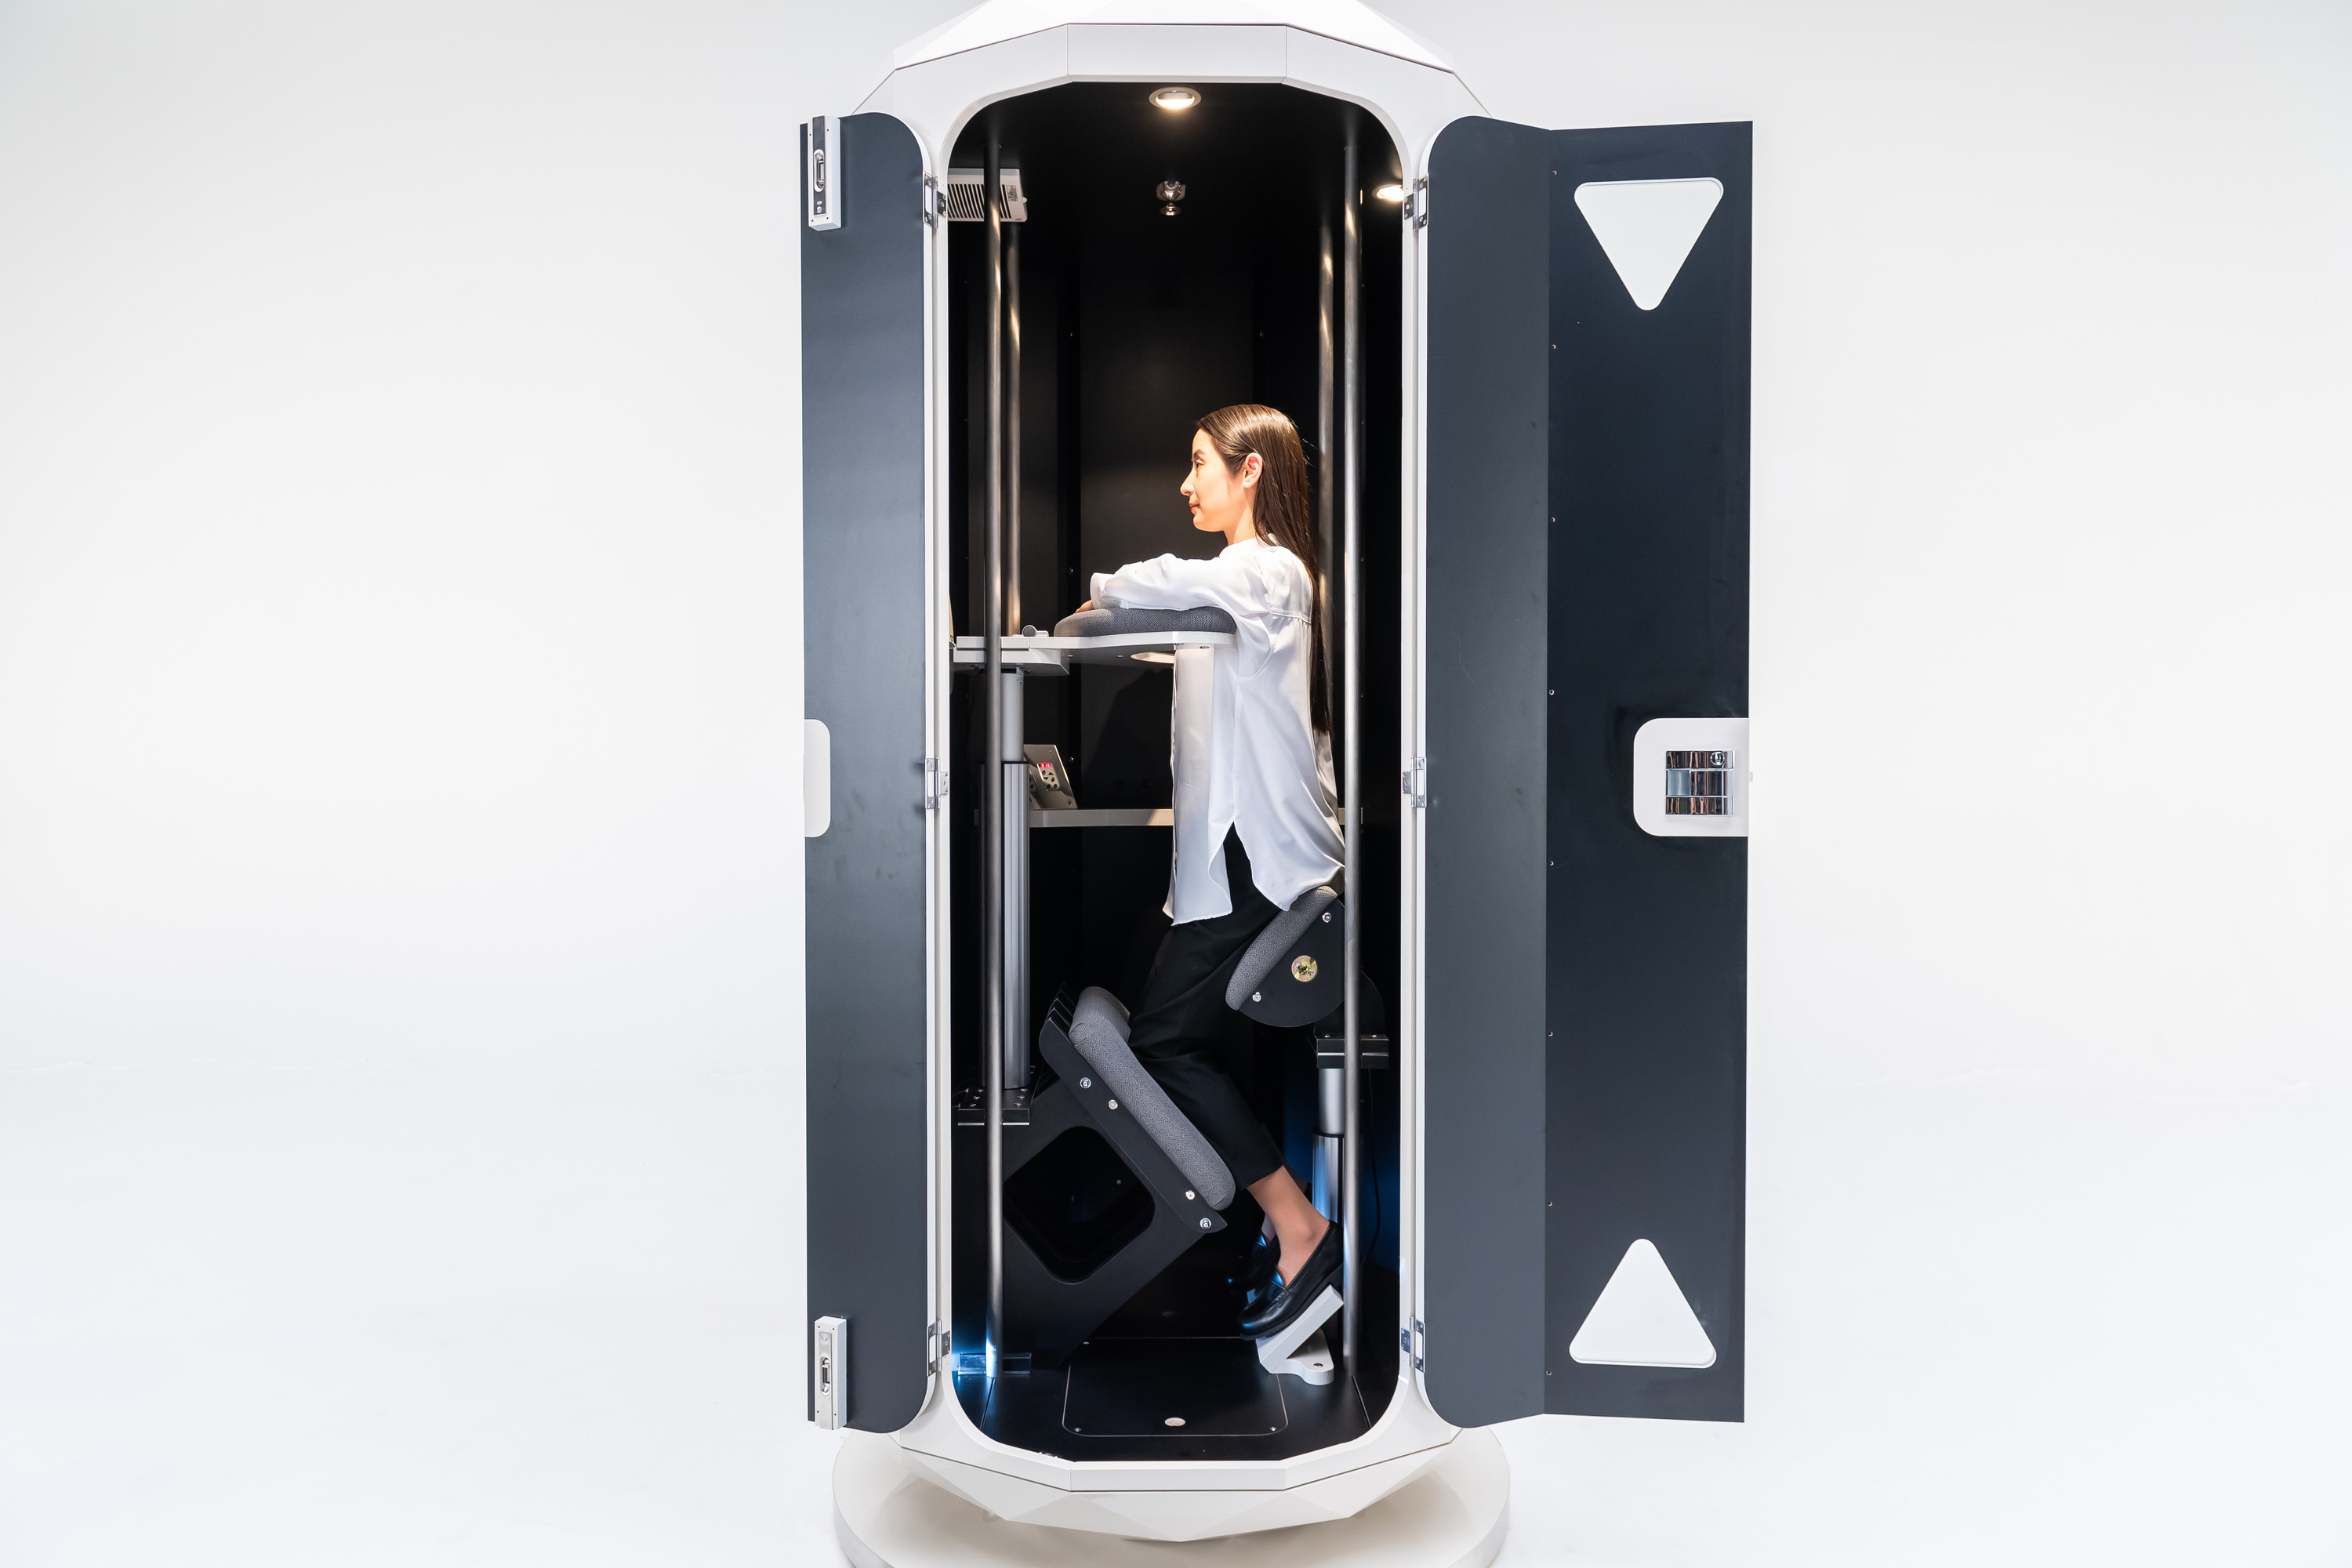 Nescafé in Japan offers sleeping capsules for naps